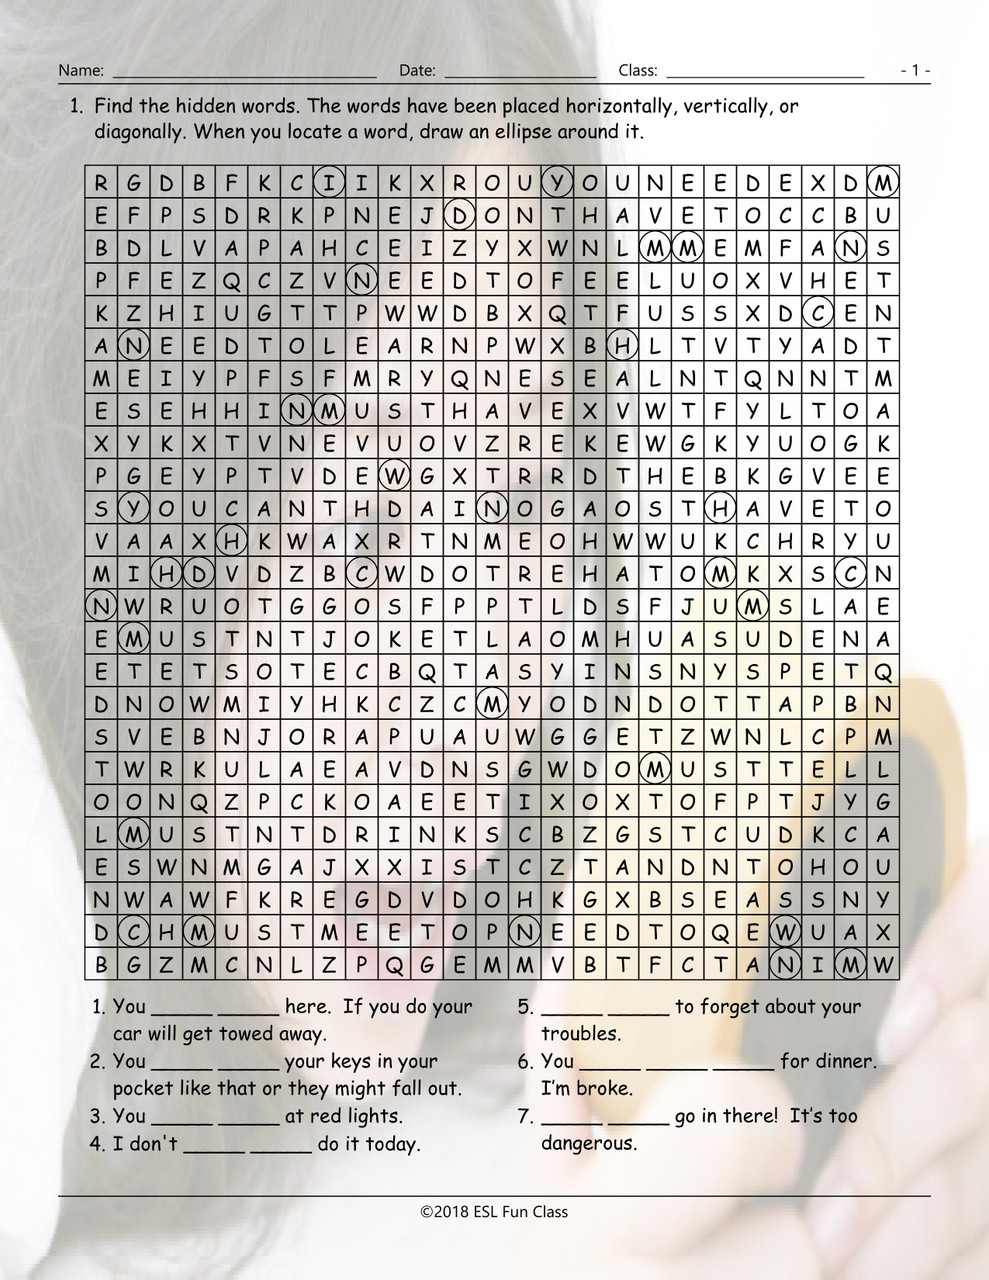 https://cdn11.bigcommerce.com/s-wpgom64n7v/images/stencil/1280x1280/products/14331/56585/Modal_Verbs-Obligation_Necessity_Prohibition_Wordsearch_Worksheet__95700.1593193193.jpg?c=2